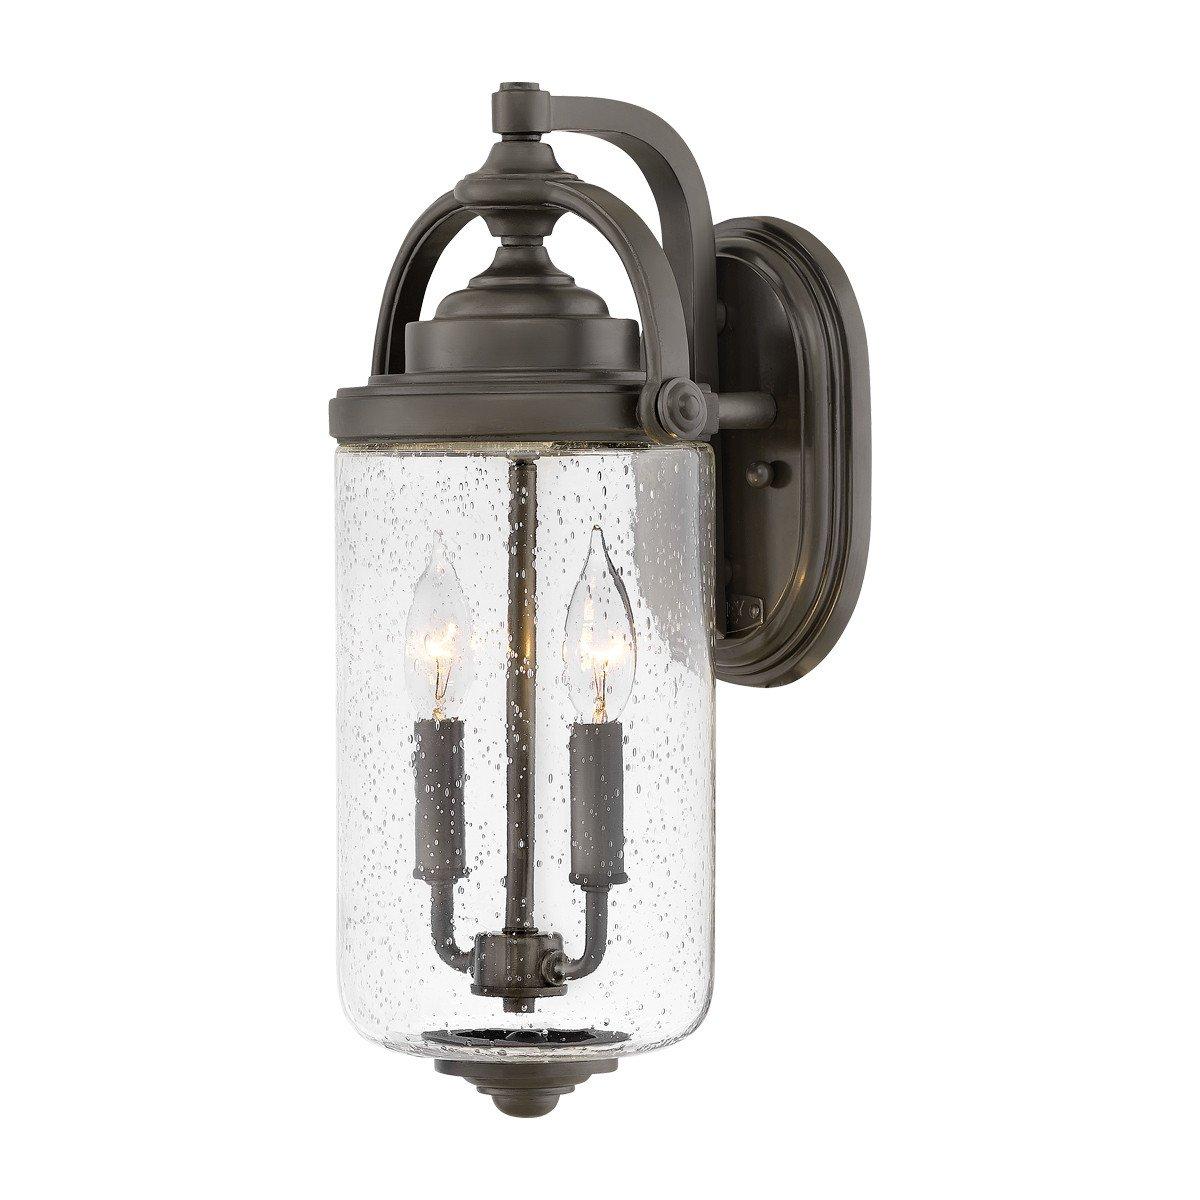 Hinkley Willoughby Outdoor Wall Lantern Oil Rubbed Bronze IP44